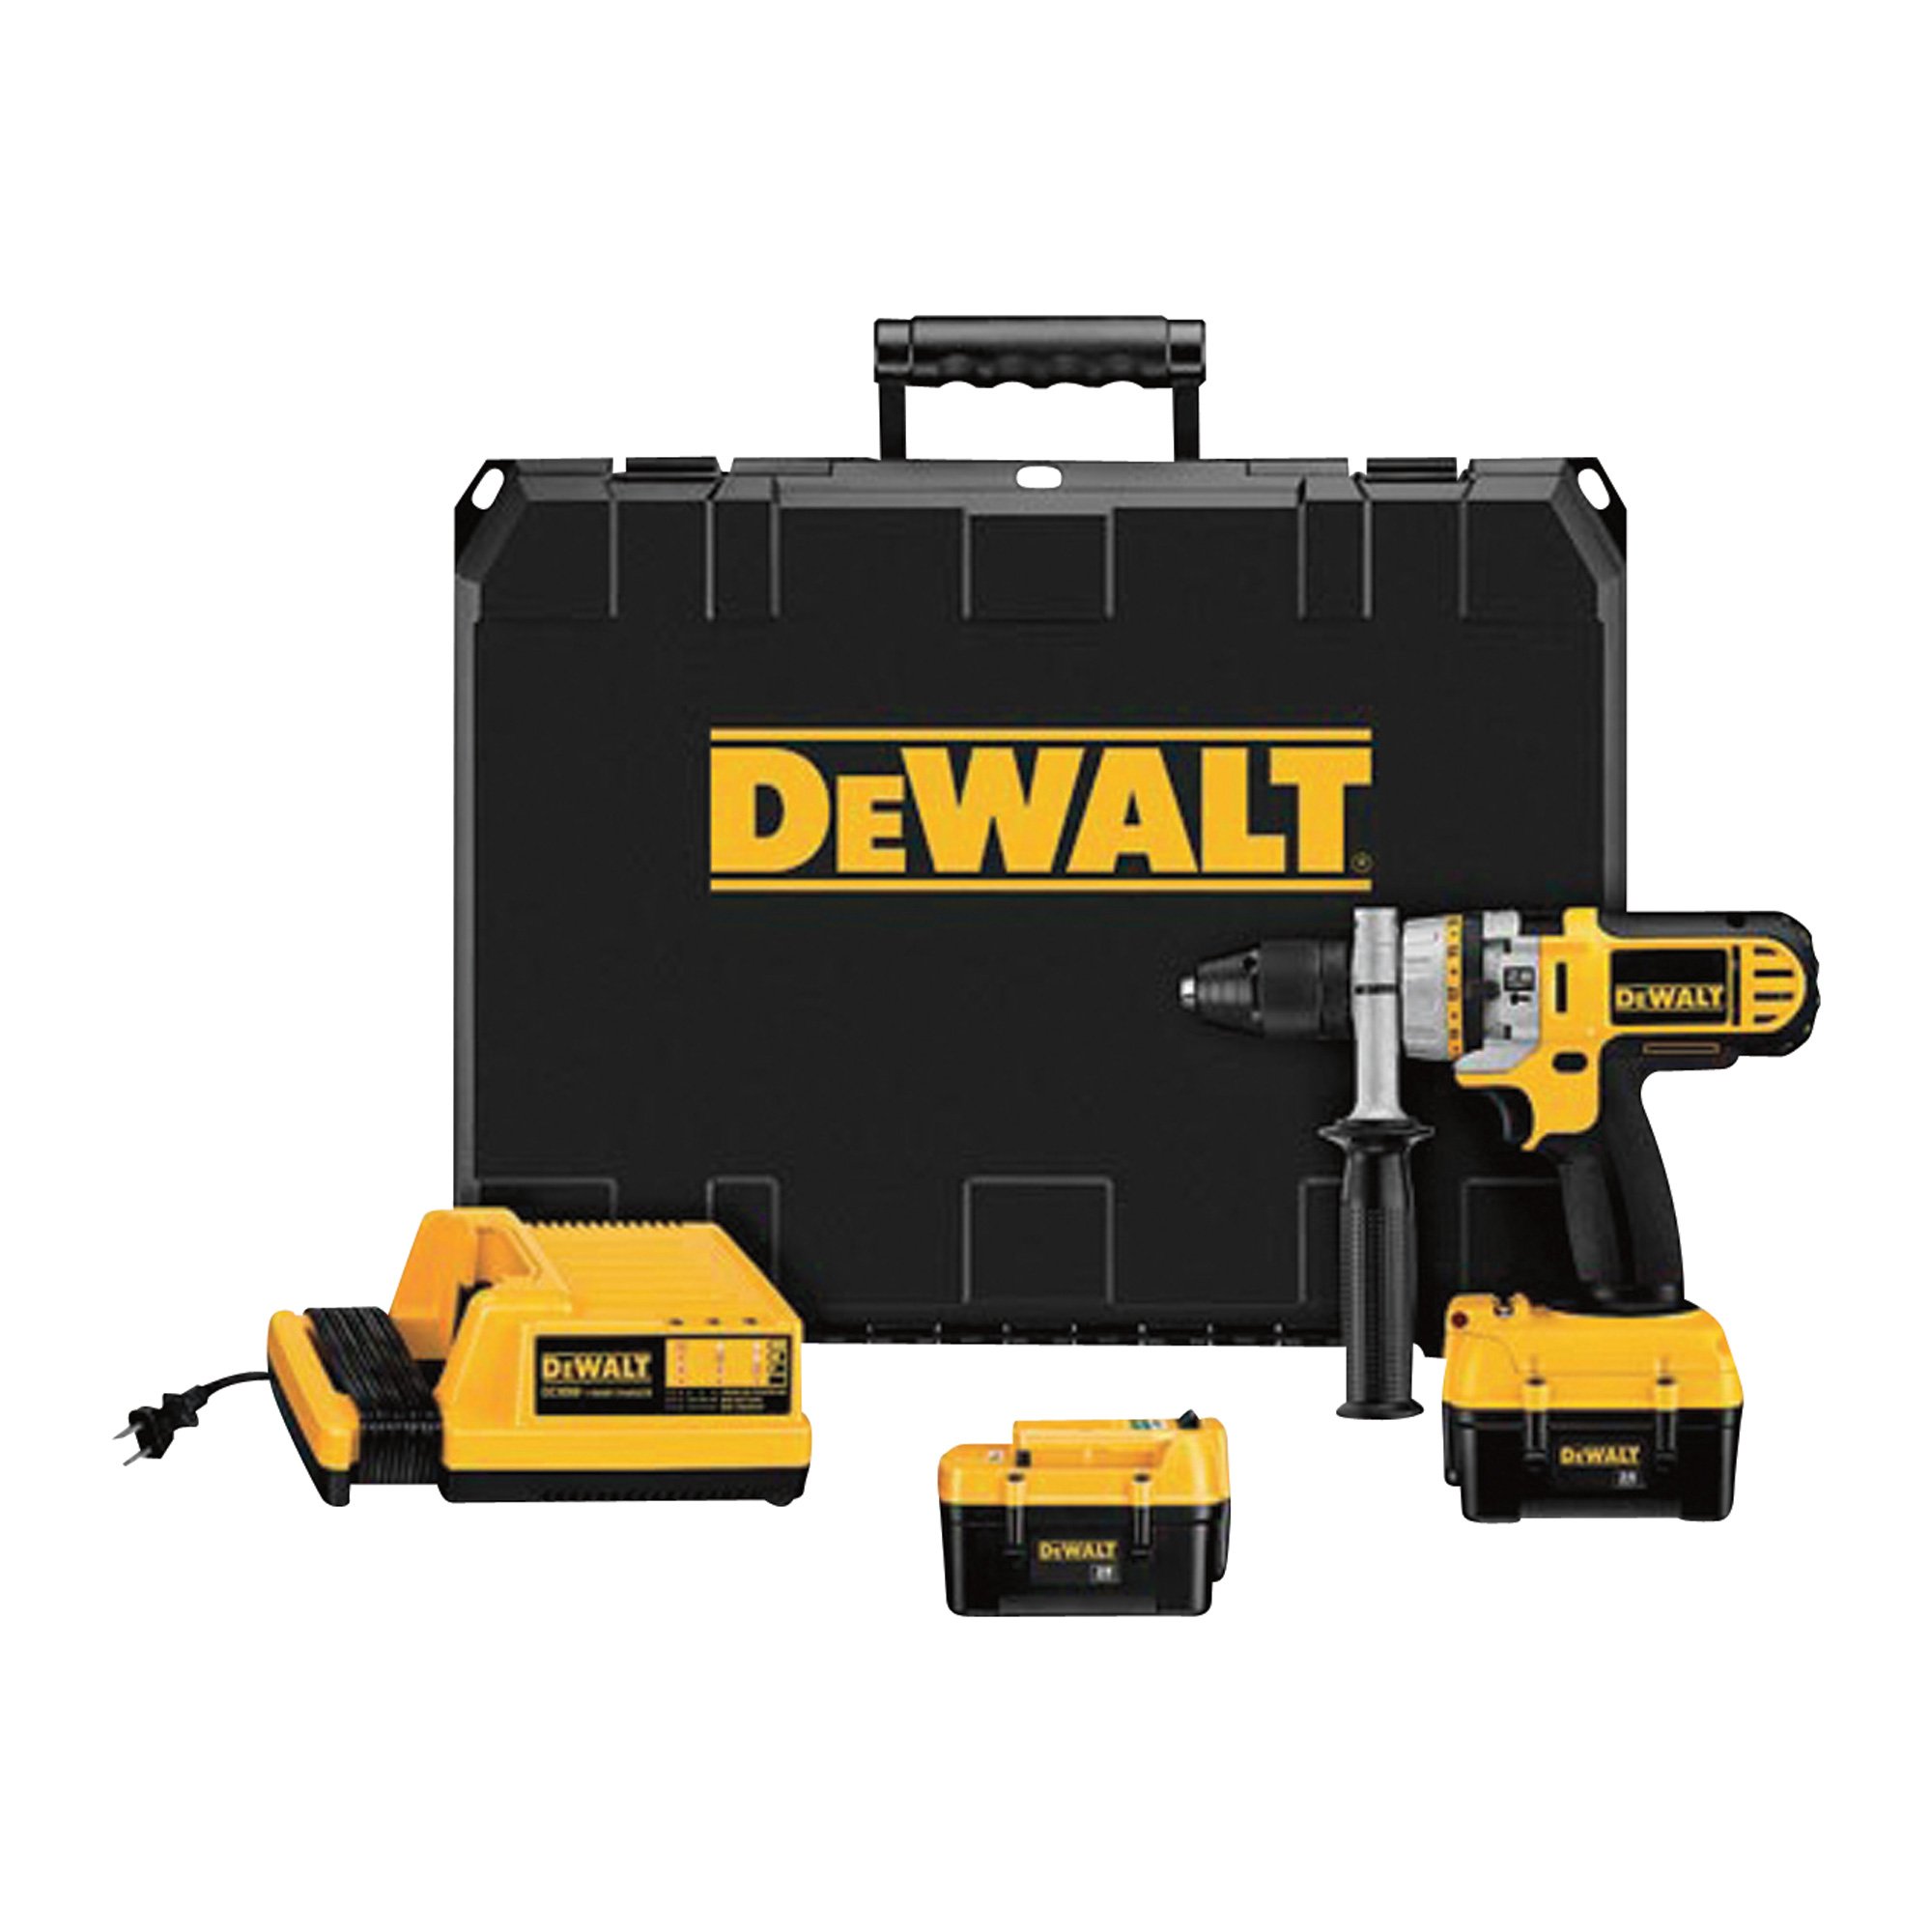 Heavy-Duty Cordless Hammerdrill/Drill/Driver with NANO Technology — 28V, 1/2in., Model# DC910KL Tool